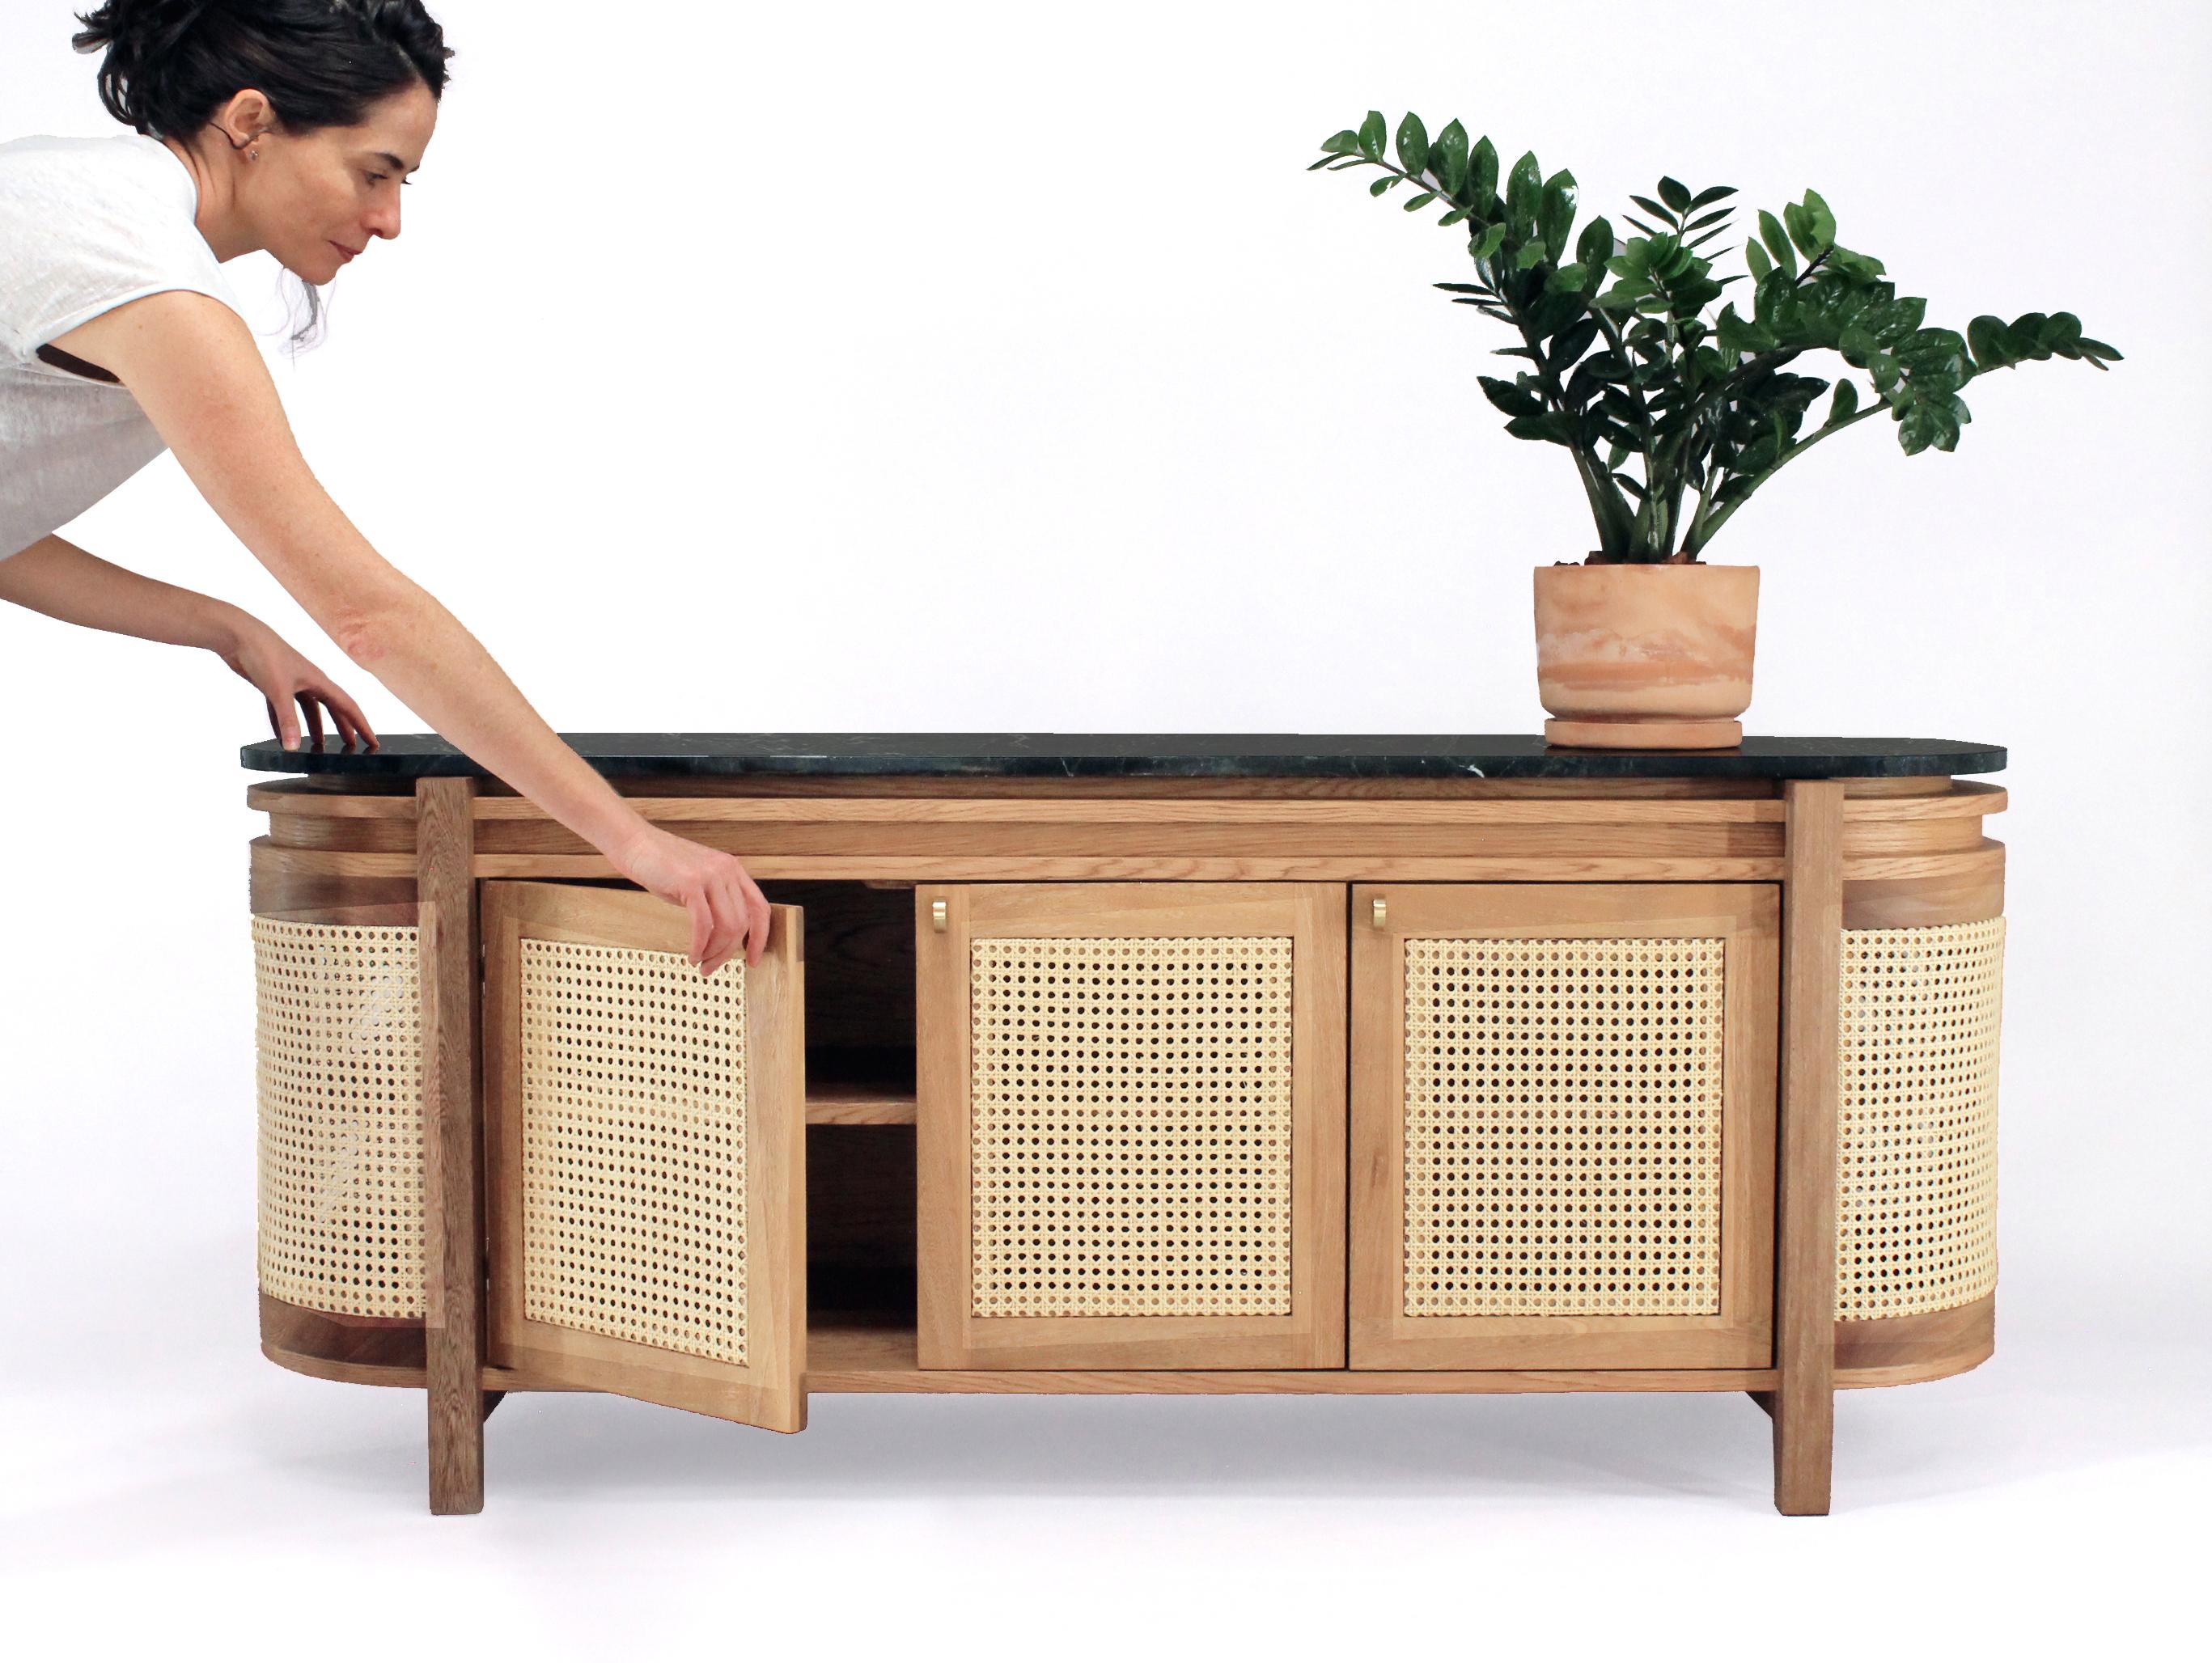 Modern Av. Mexico Sideboard, Wicker and Oak with Marble, Mexican Design 160 cm For Sale